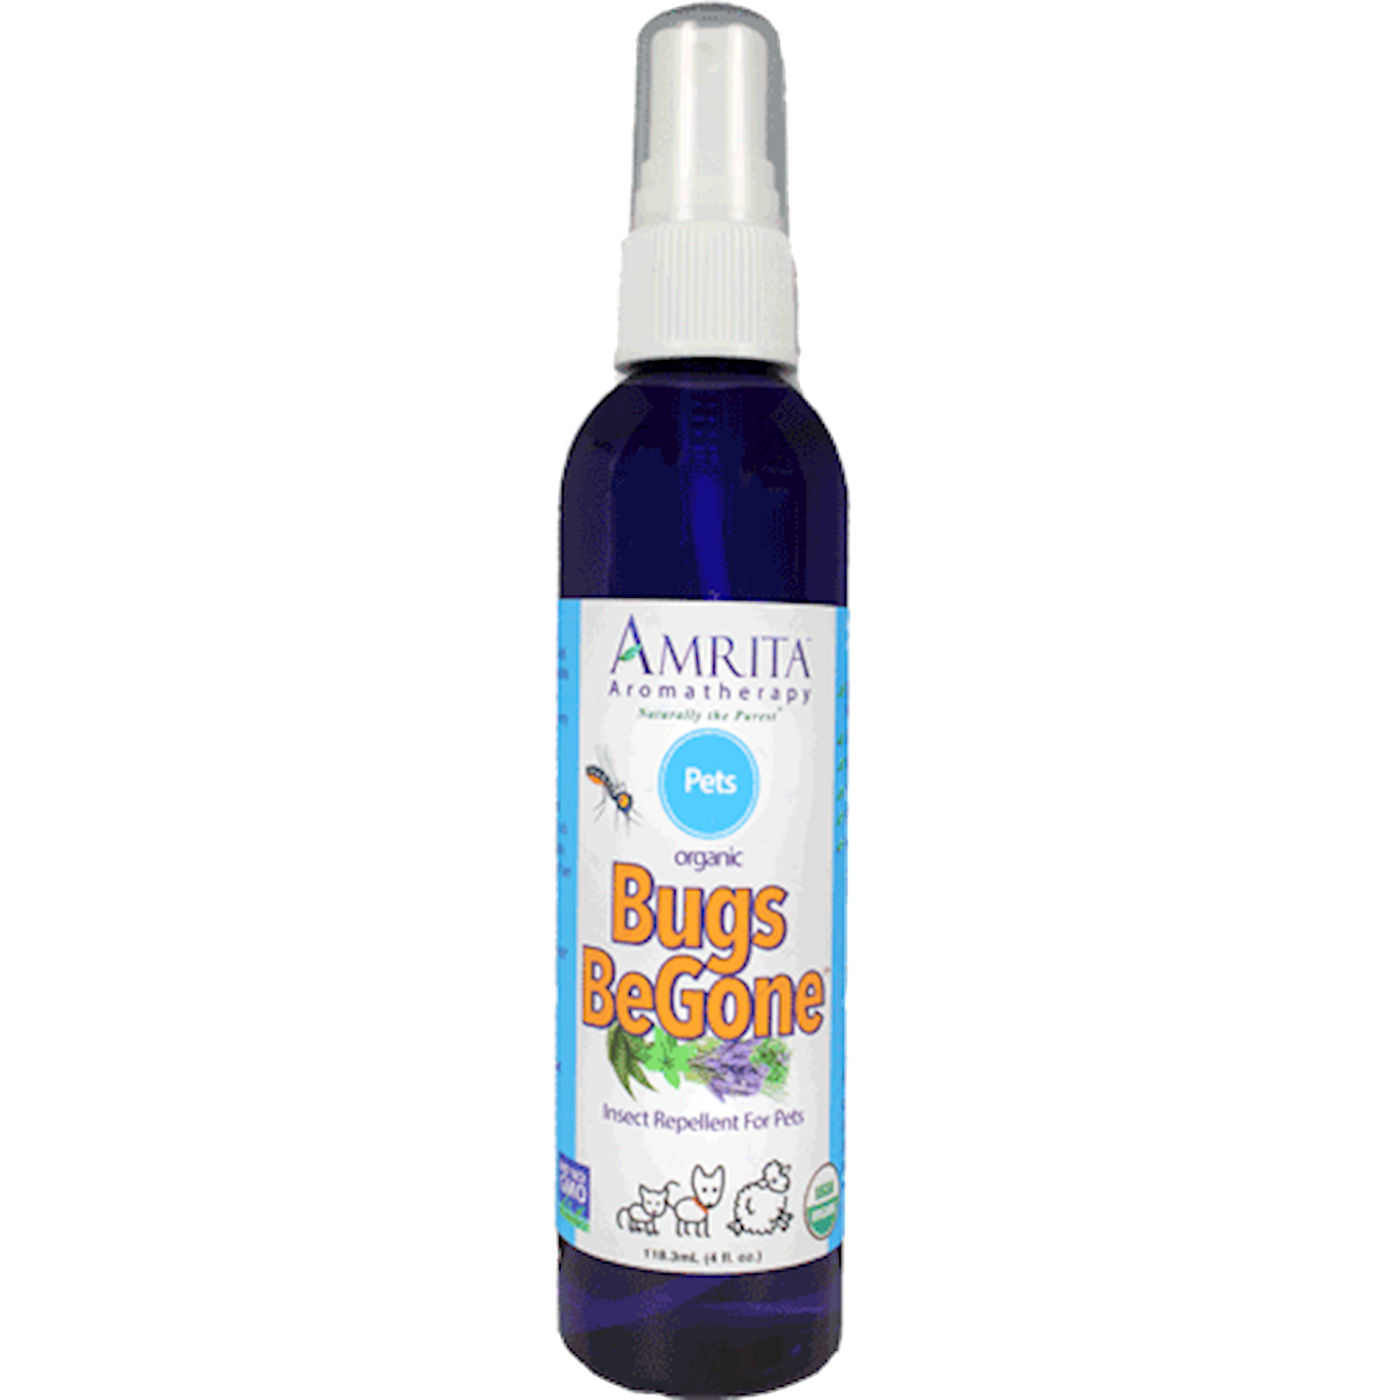 Org Bugs Be Gone for Pets Org. 4 fl oz Curated Wellness